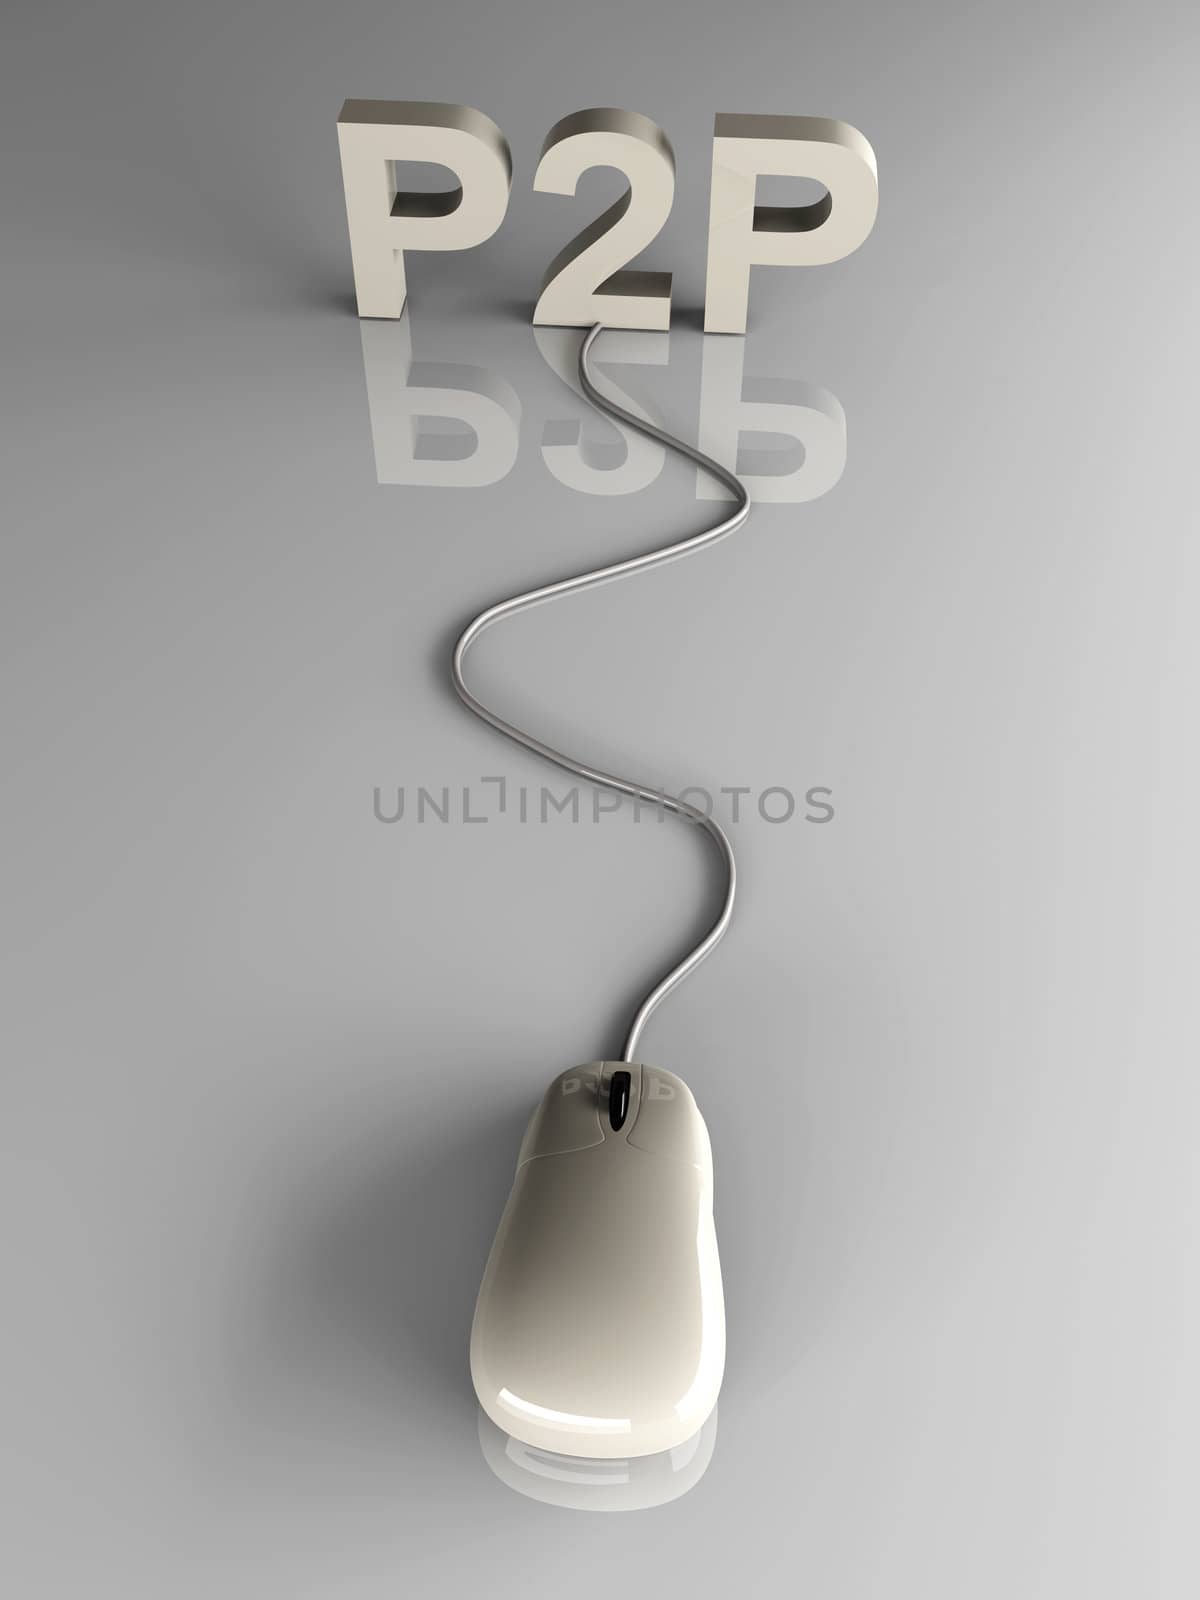 3D rendered Illustration. Peer to peer connection.